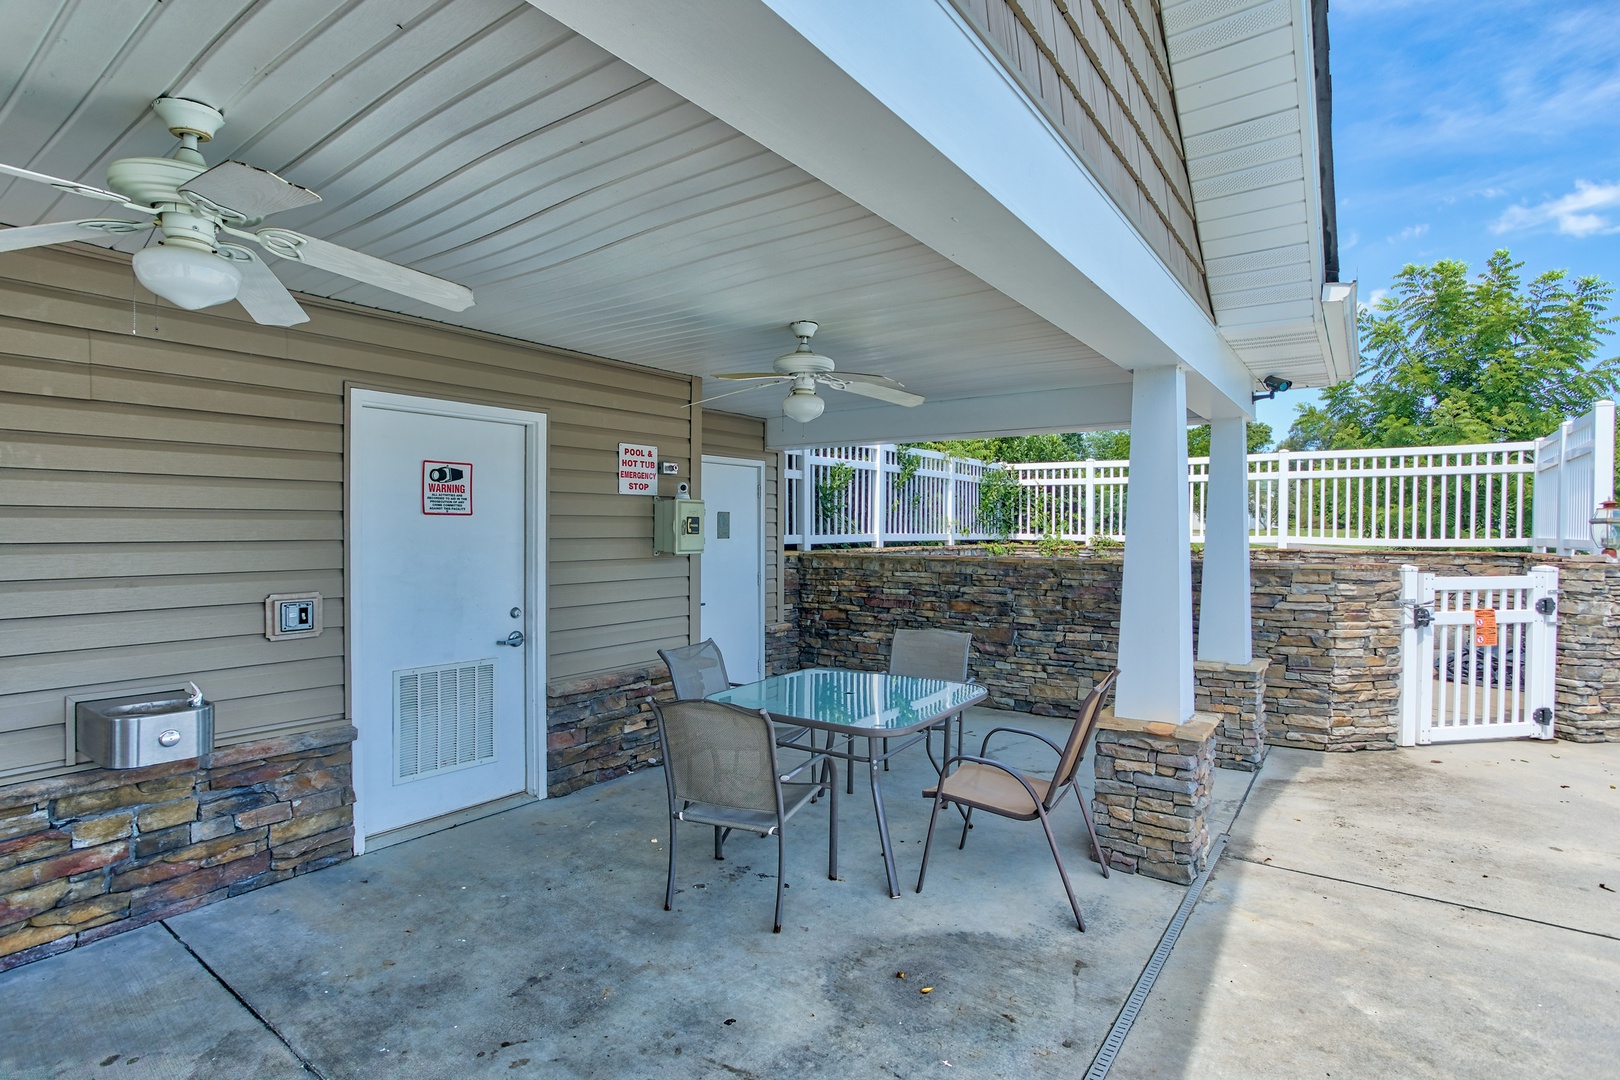 Seating at the outdoor pool deck at A Pigeon Forge Retreat, a 2 bedroom cabin rental located in Pigeon Forge